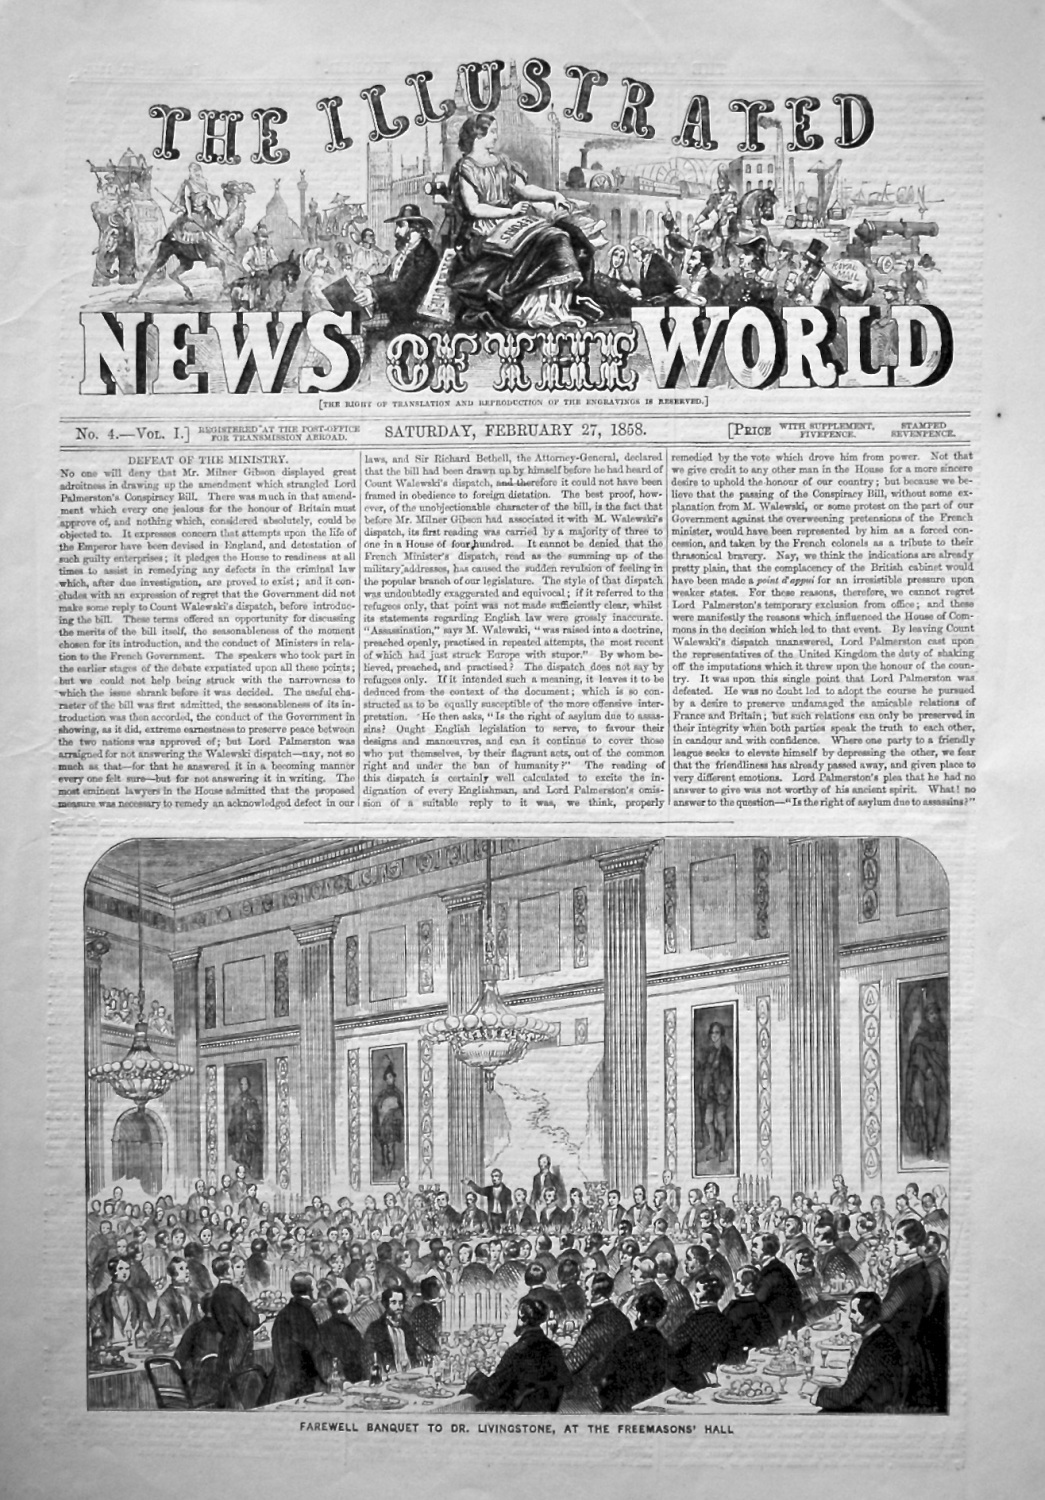 The Illustrated News of the World, February 27th, 1858.